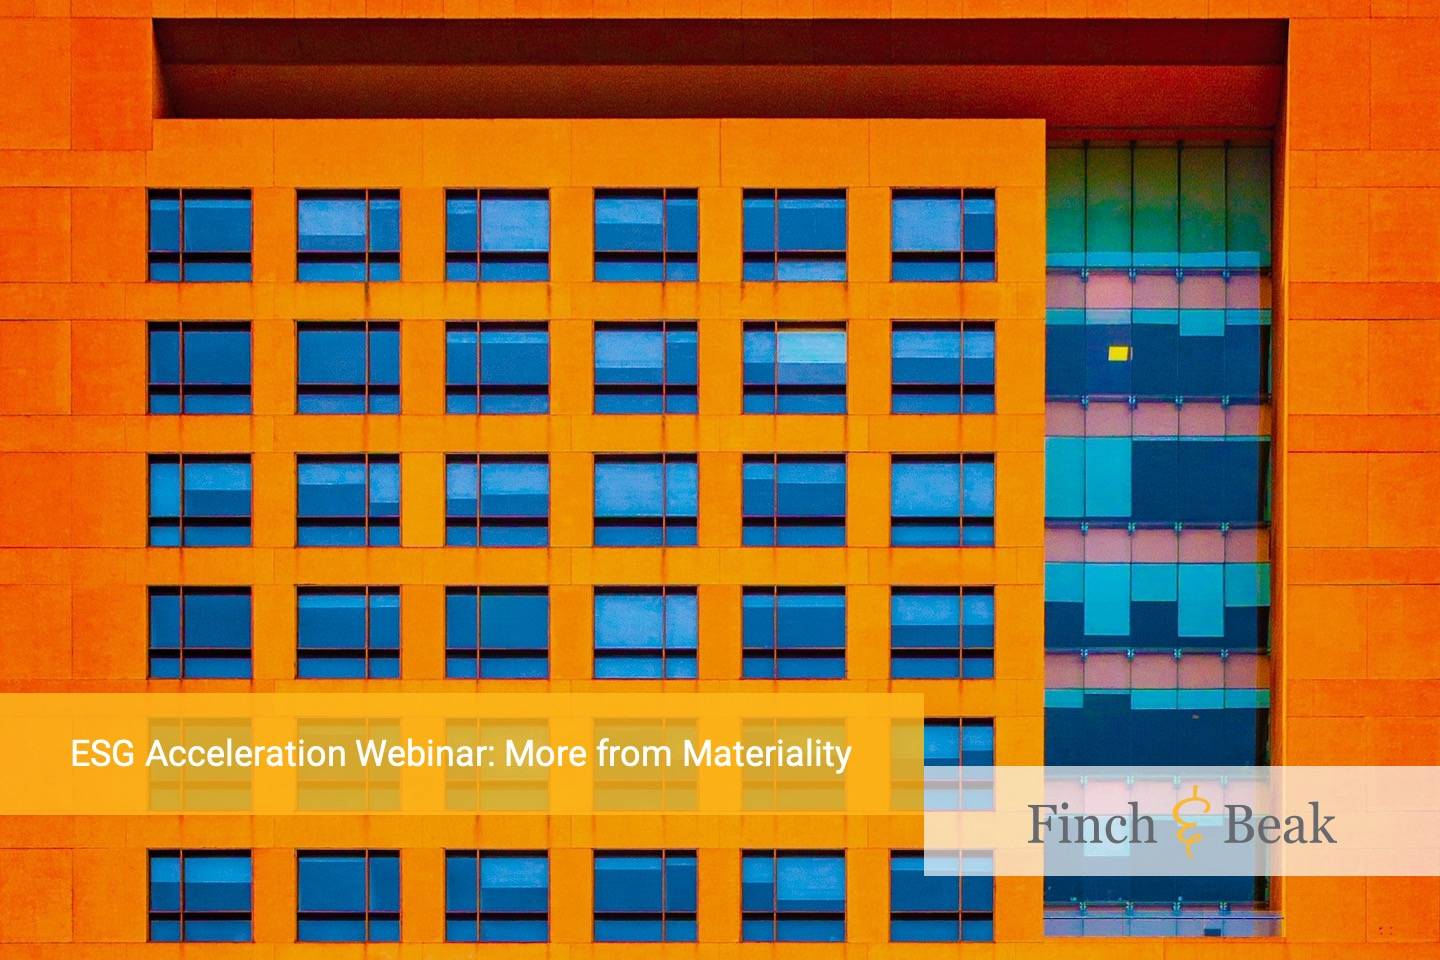 ESG Acceleration Webinar: More from Materiality